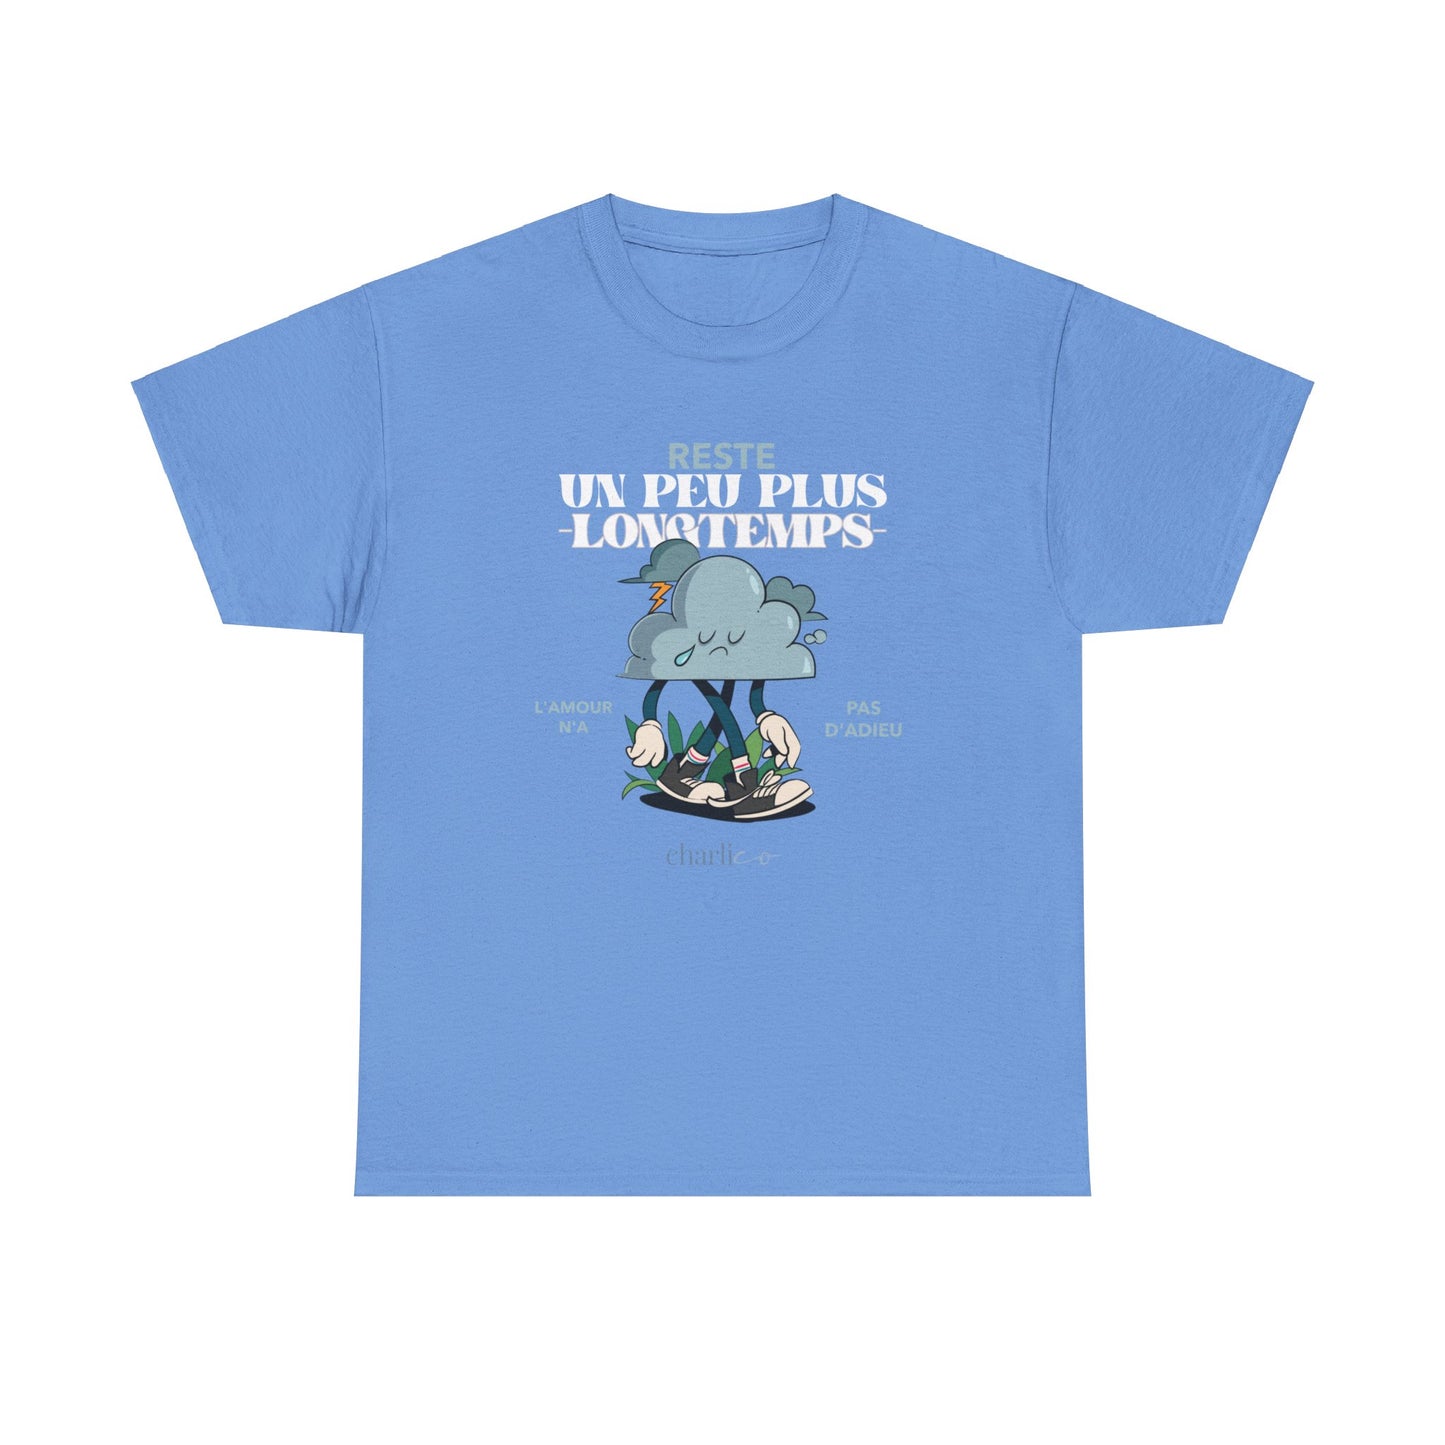 Printable t-shirt -STAY A LITTLE- for adults